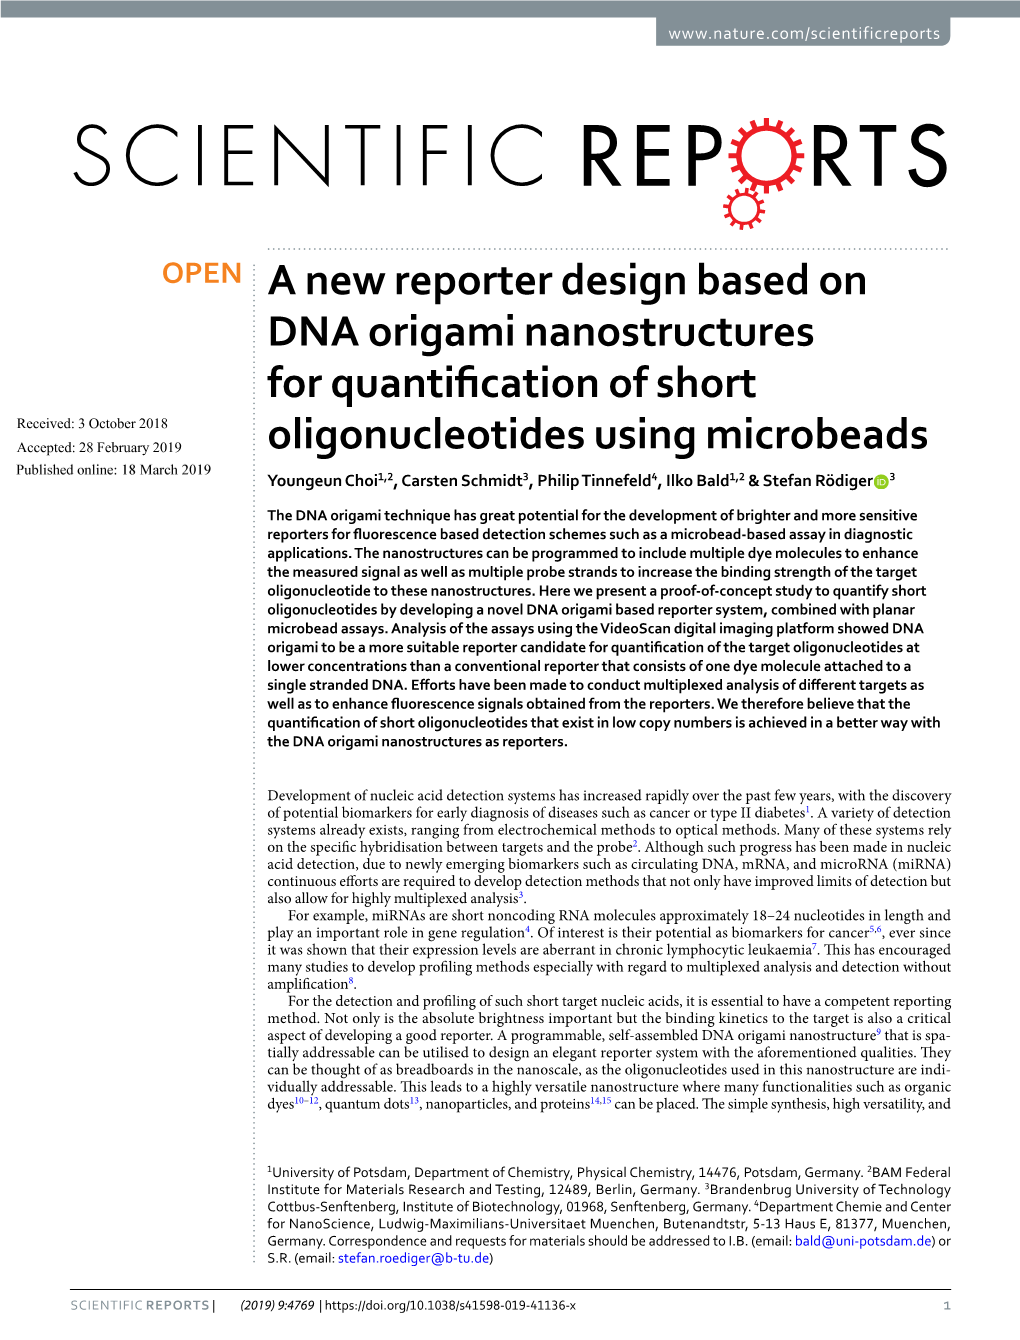 A New Reporter Design Based on DNA Origami Nanostructures For